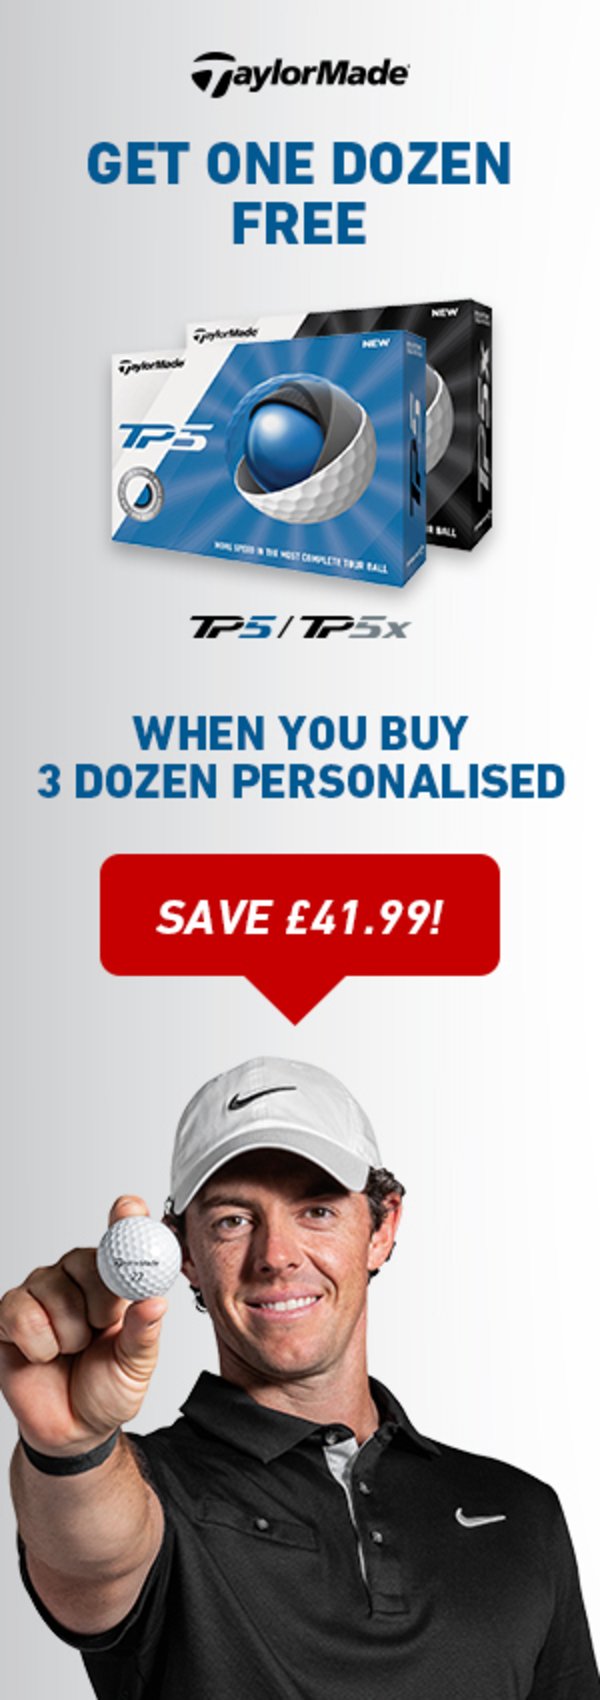 4 dozen TaylorMade TP5 balls for the price of 3